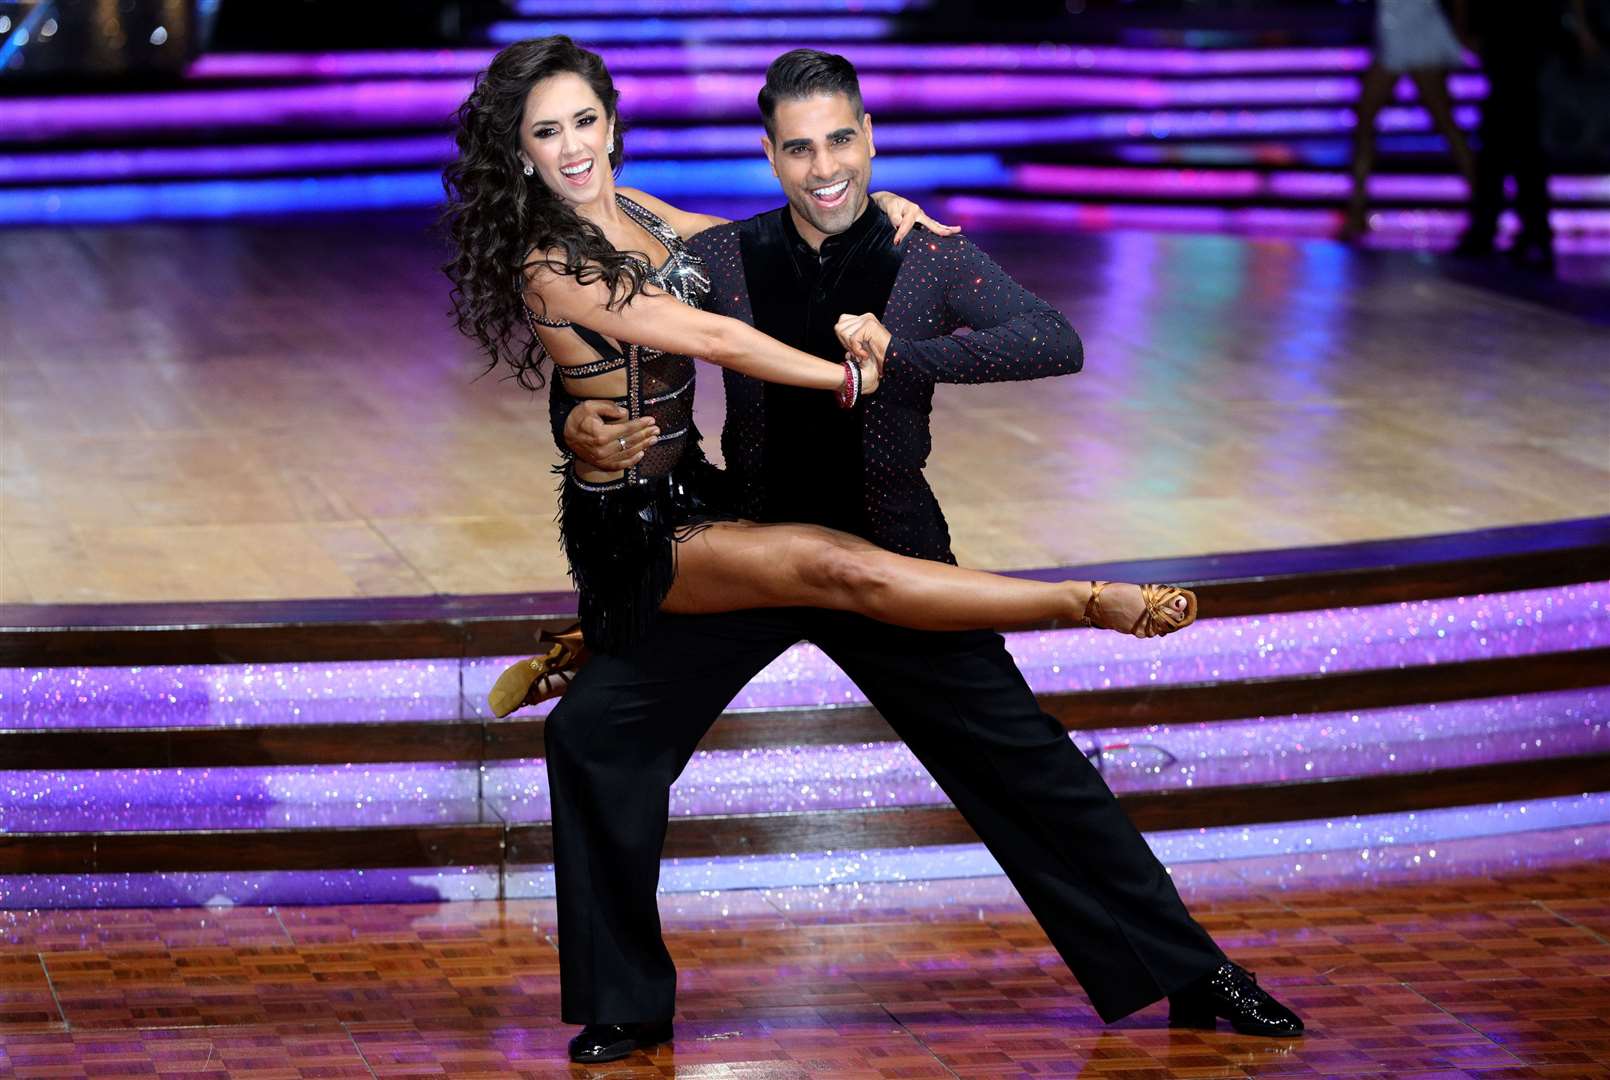 Medway's Dr Ranj Singh and Janette Manrara on the Strictly Come Dancing Tour in 2019. Picture: Aaron Chown/PA Photos